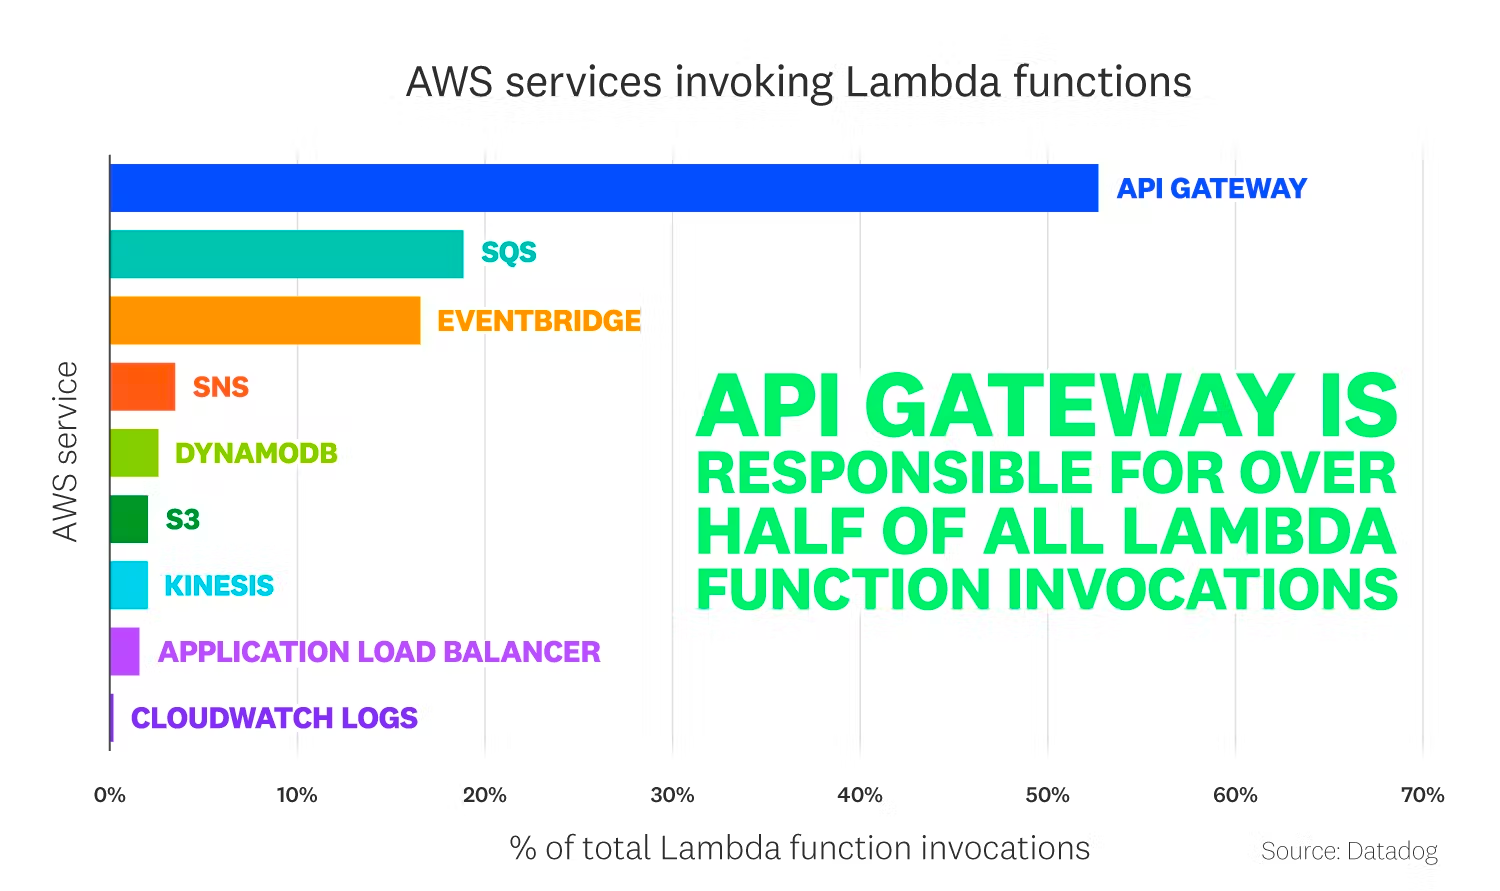 API Gateway and SQS are the AWS technologies that invoke Lambda functions most frequently